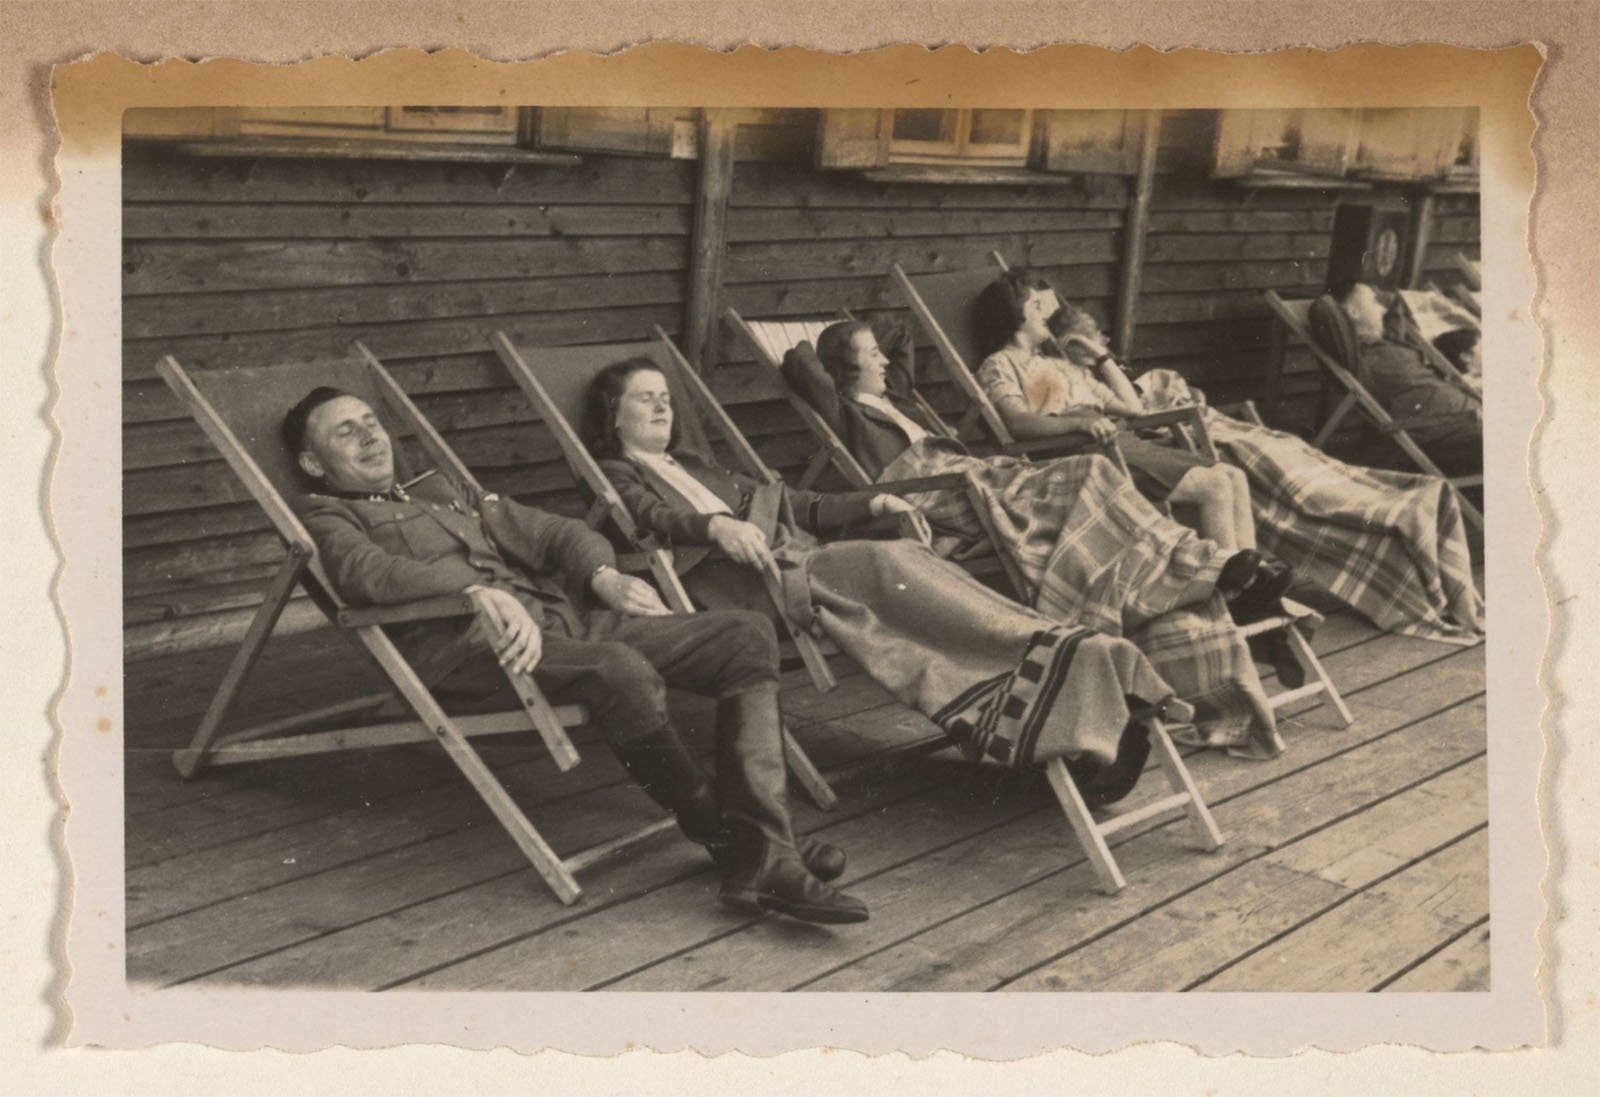 A black-and-white photograph showing four people relaxing on deck chairs arranged in a row on a wooden deck. They are covered with blankets and appear to be napping or resting beside a wooden building, with their arms outstretched holding each other's hands.